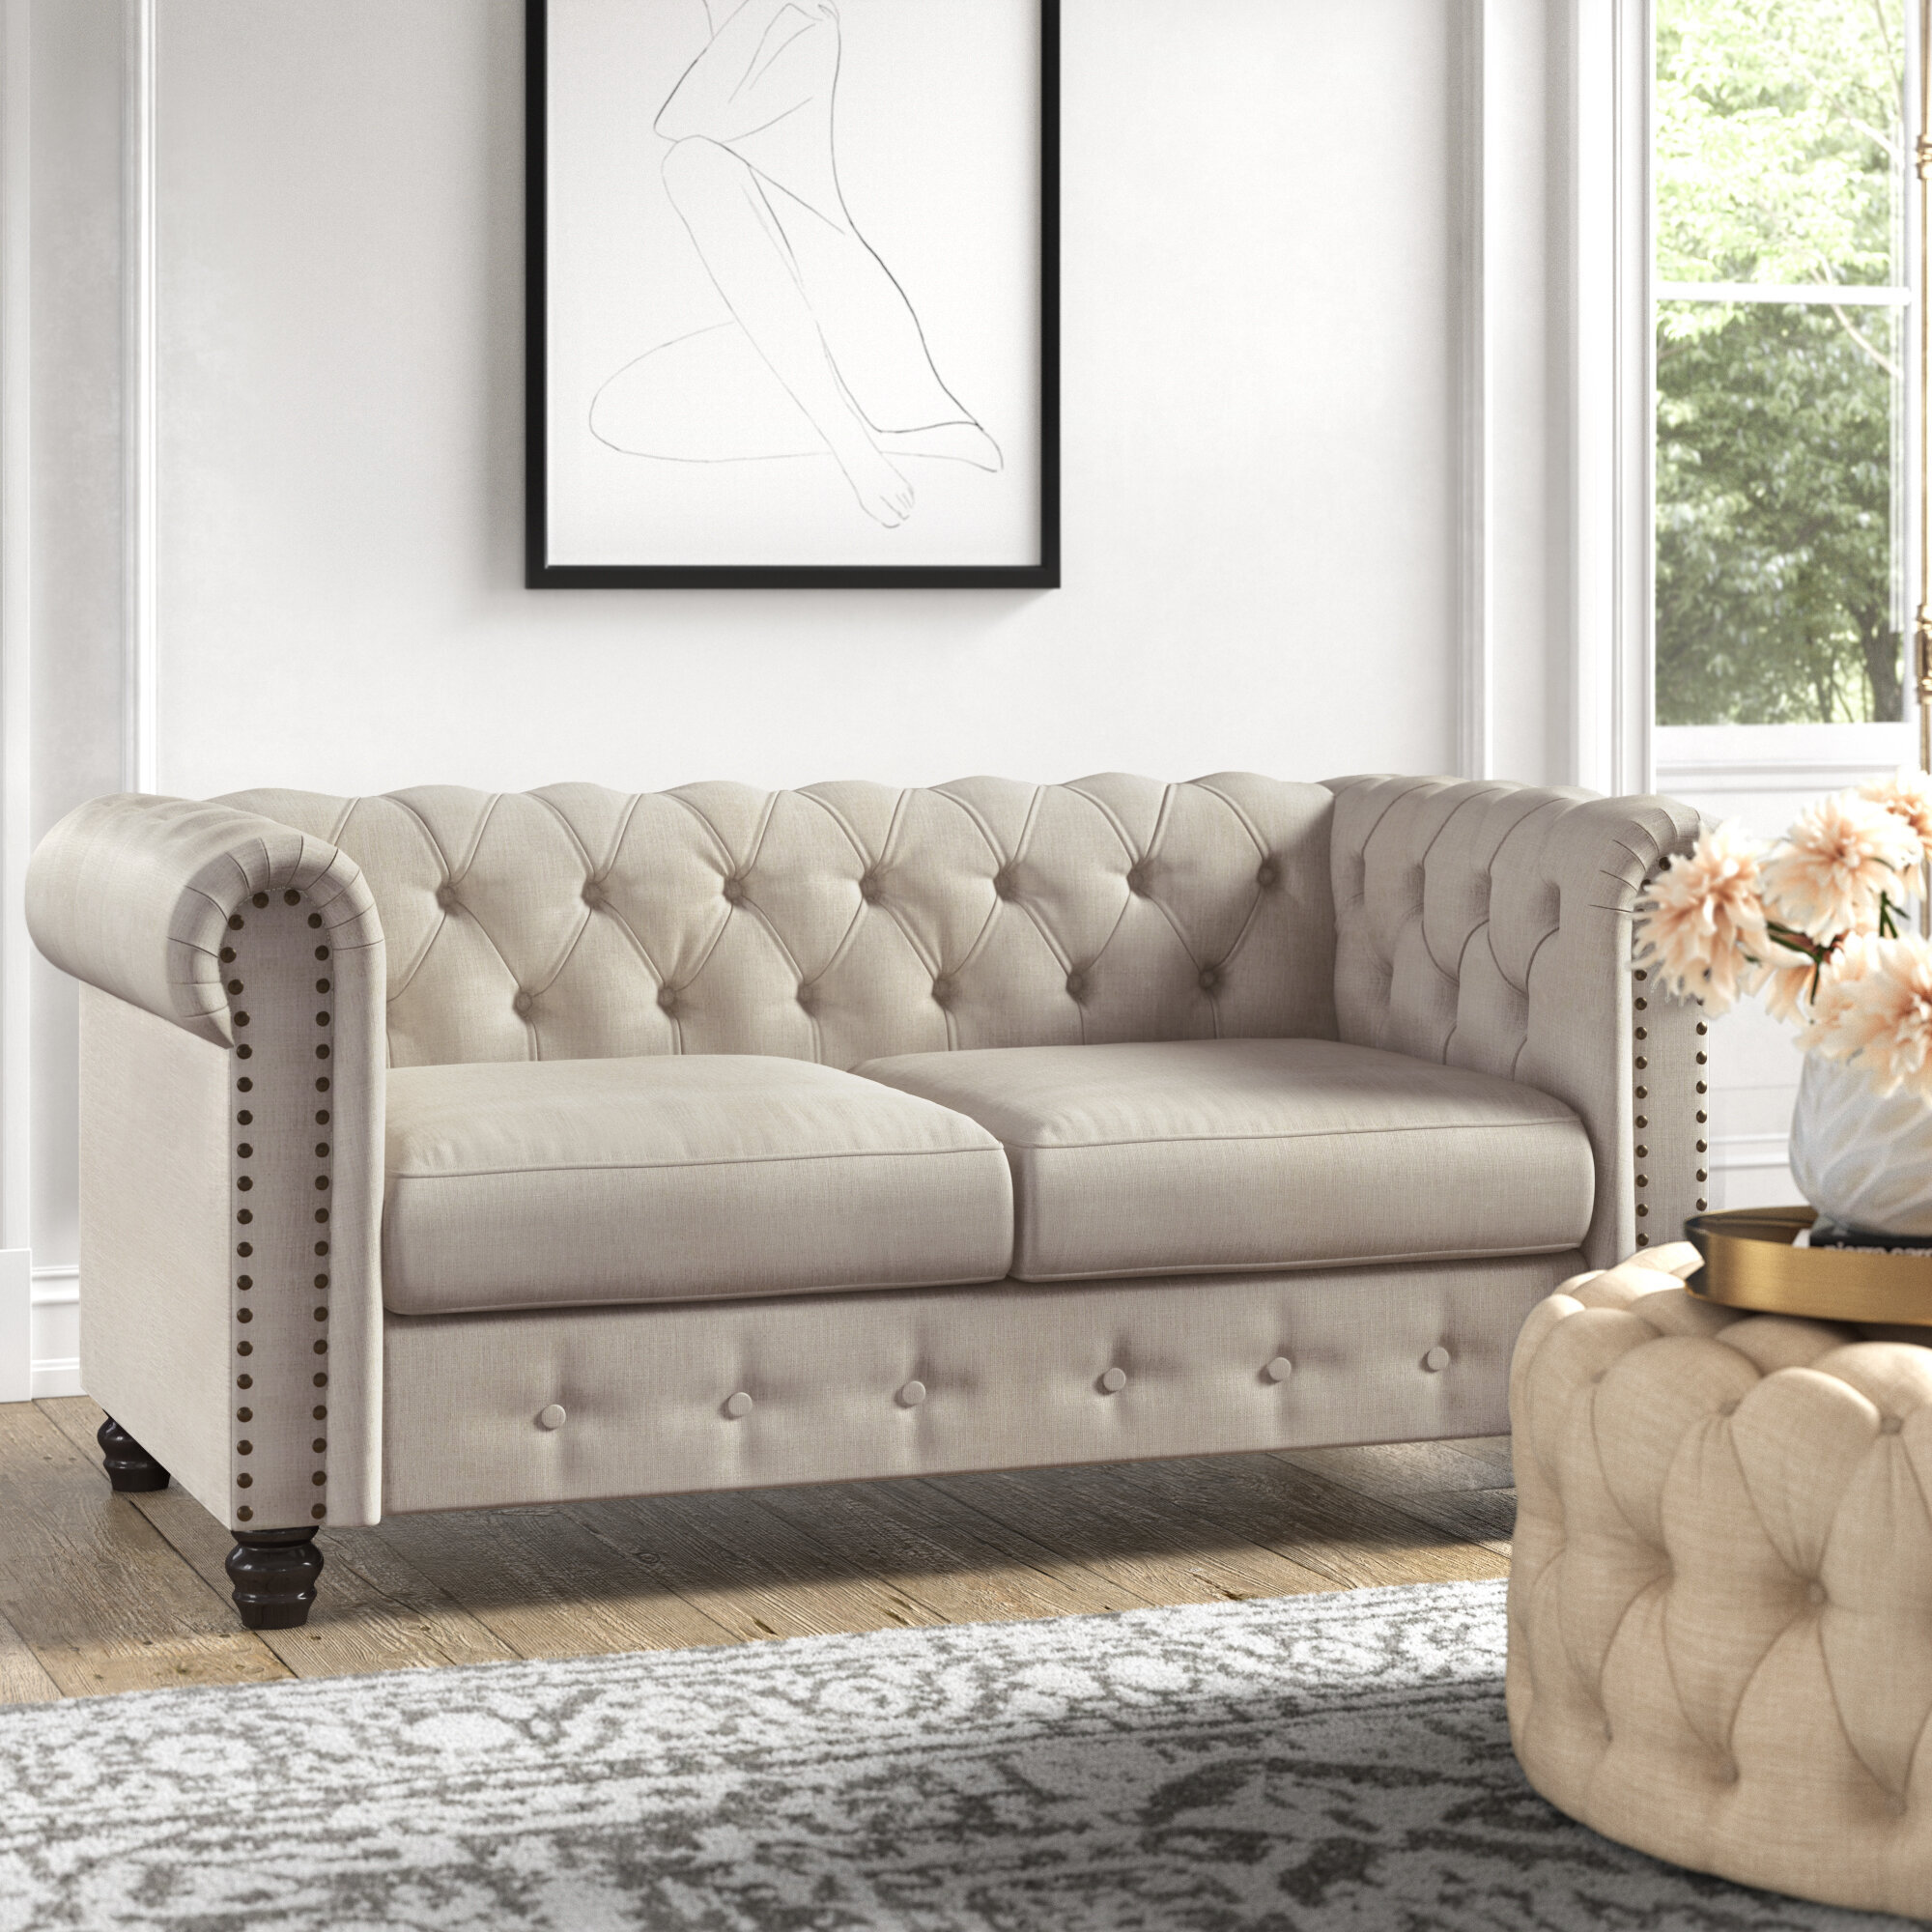 Provence 61” Rolled Arm Chesterfield Loveseat